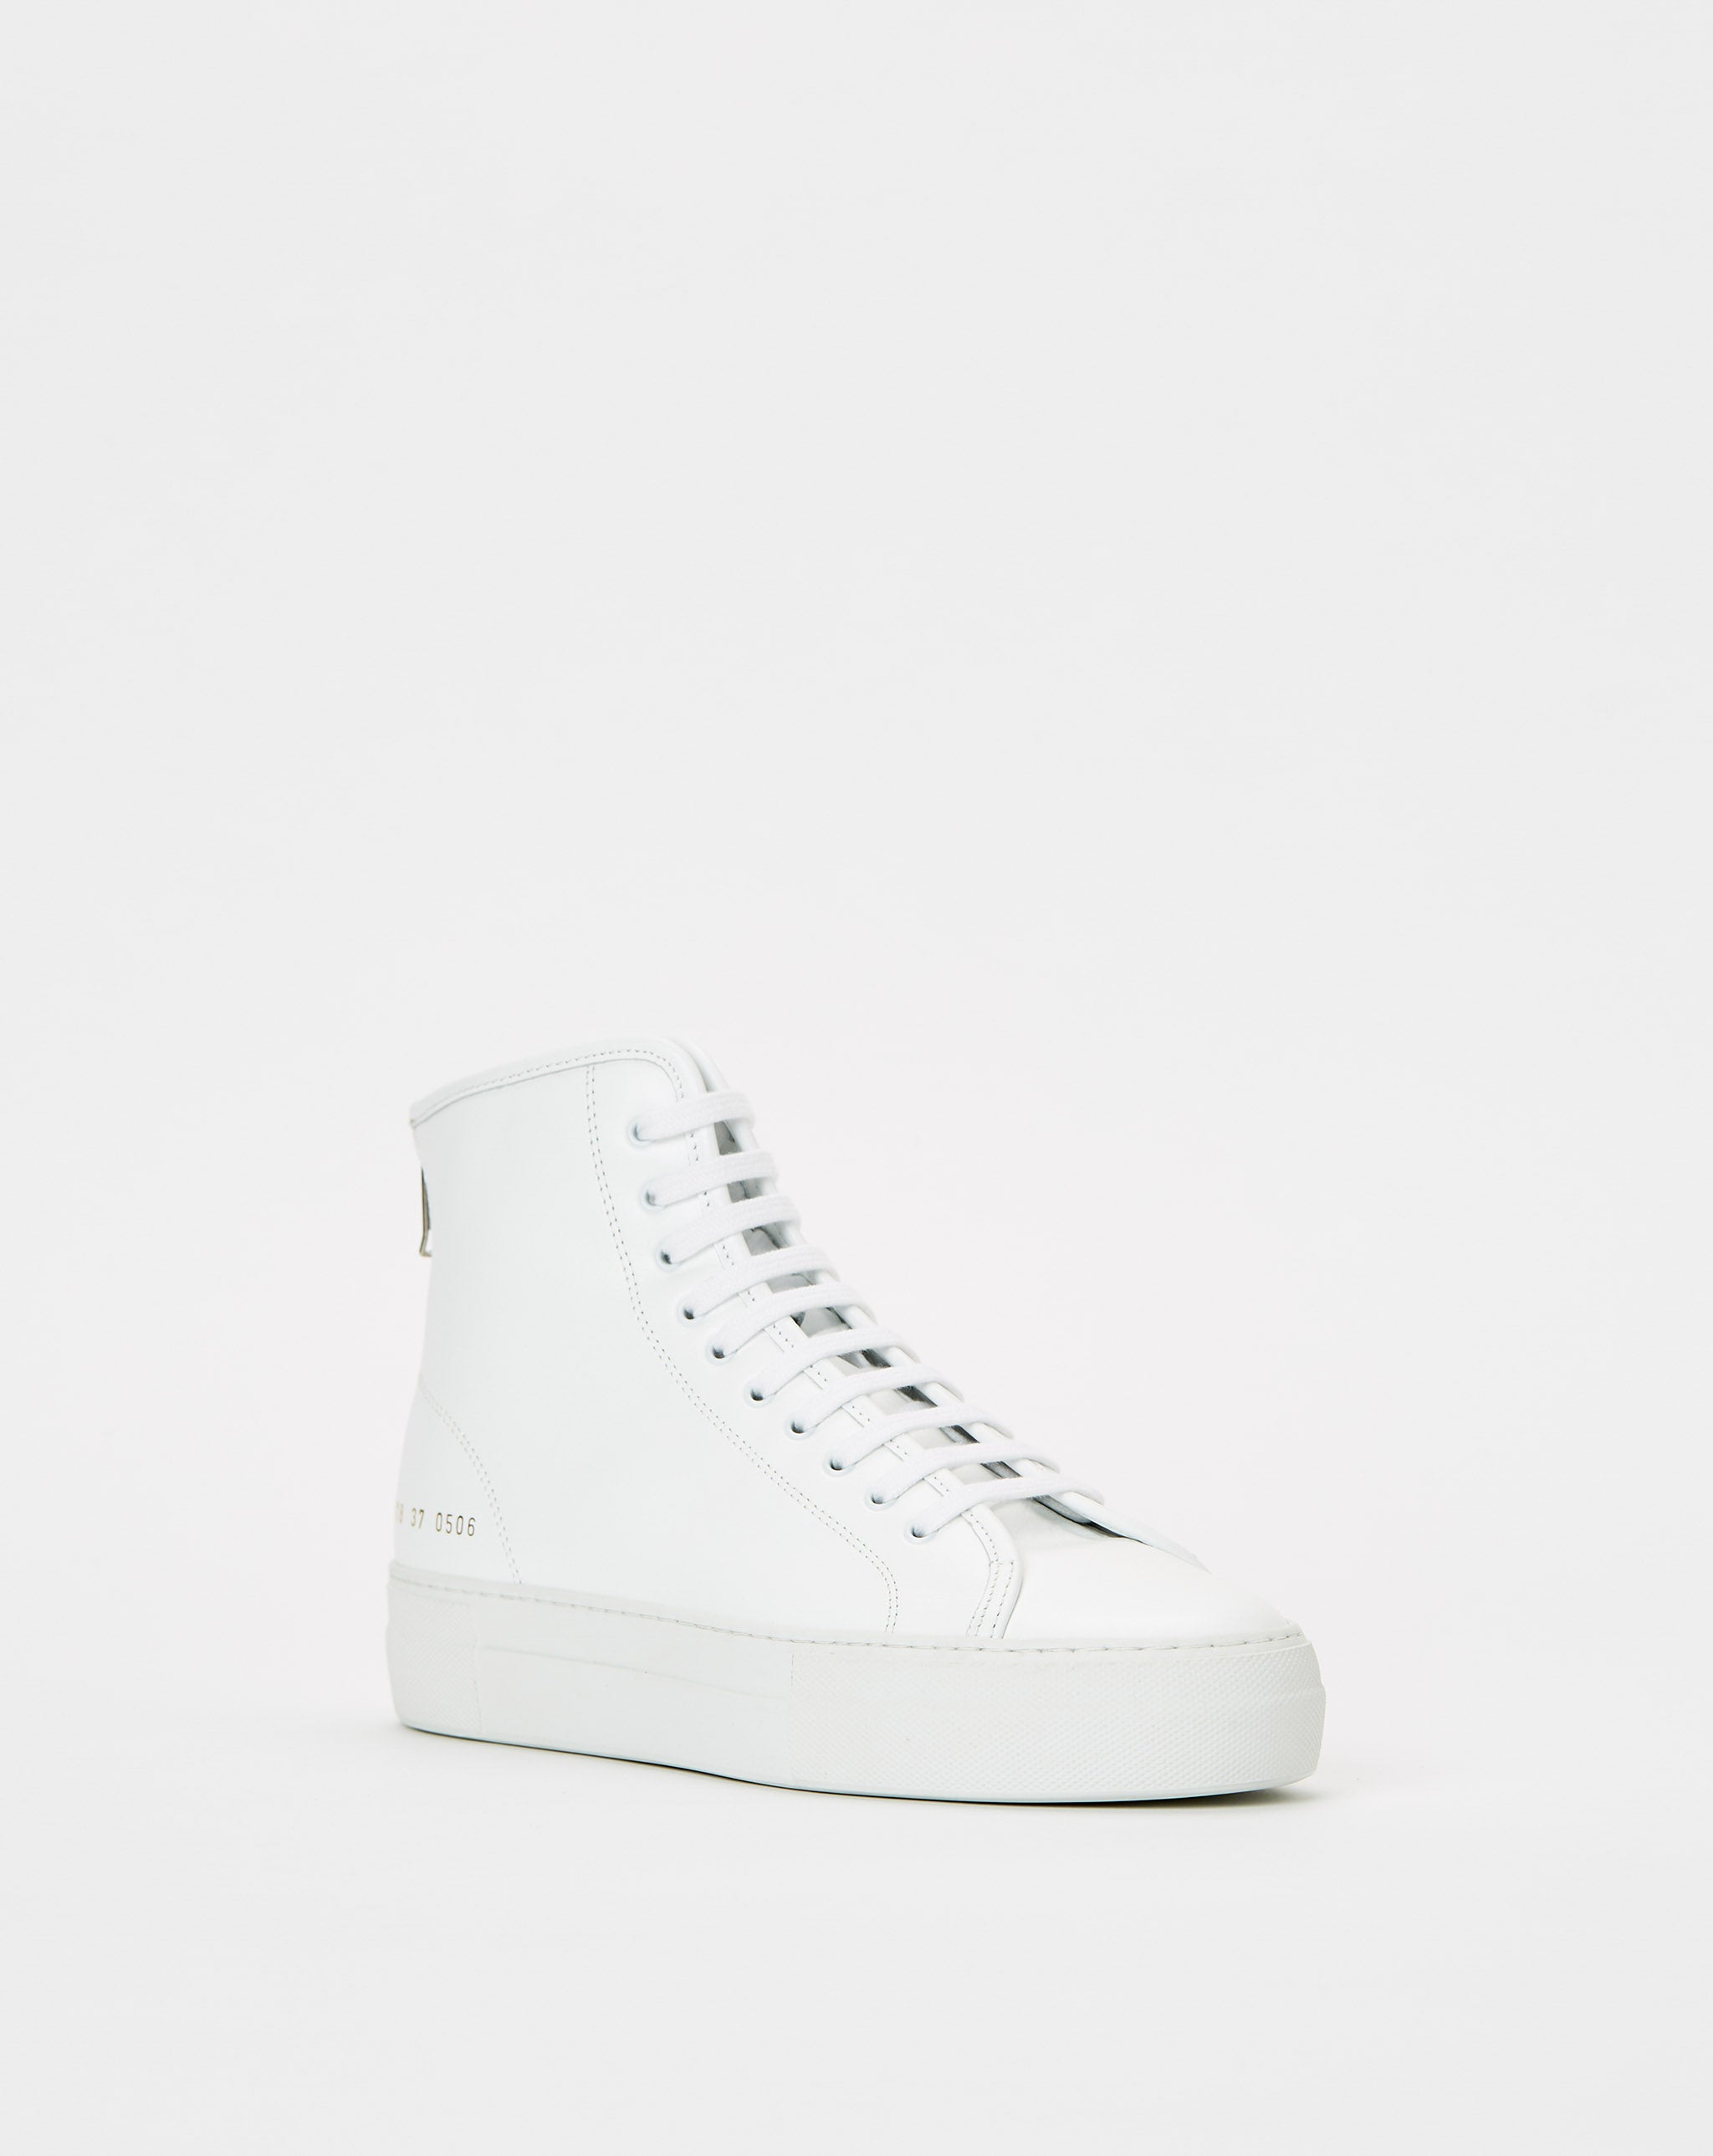 Common Projects Goudi Sandals in Black Leather  - Cheap Cerbe Jordan outlet